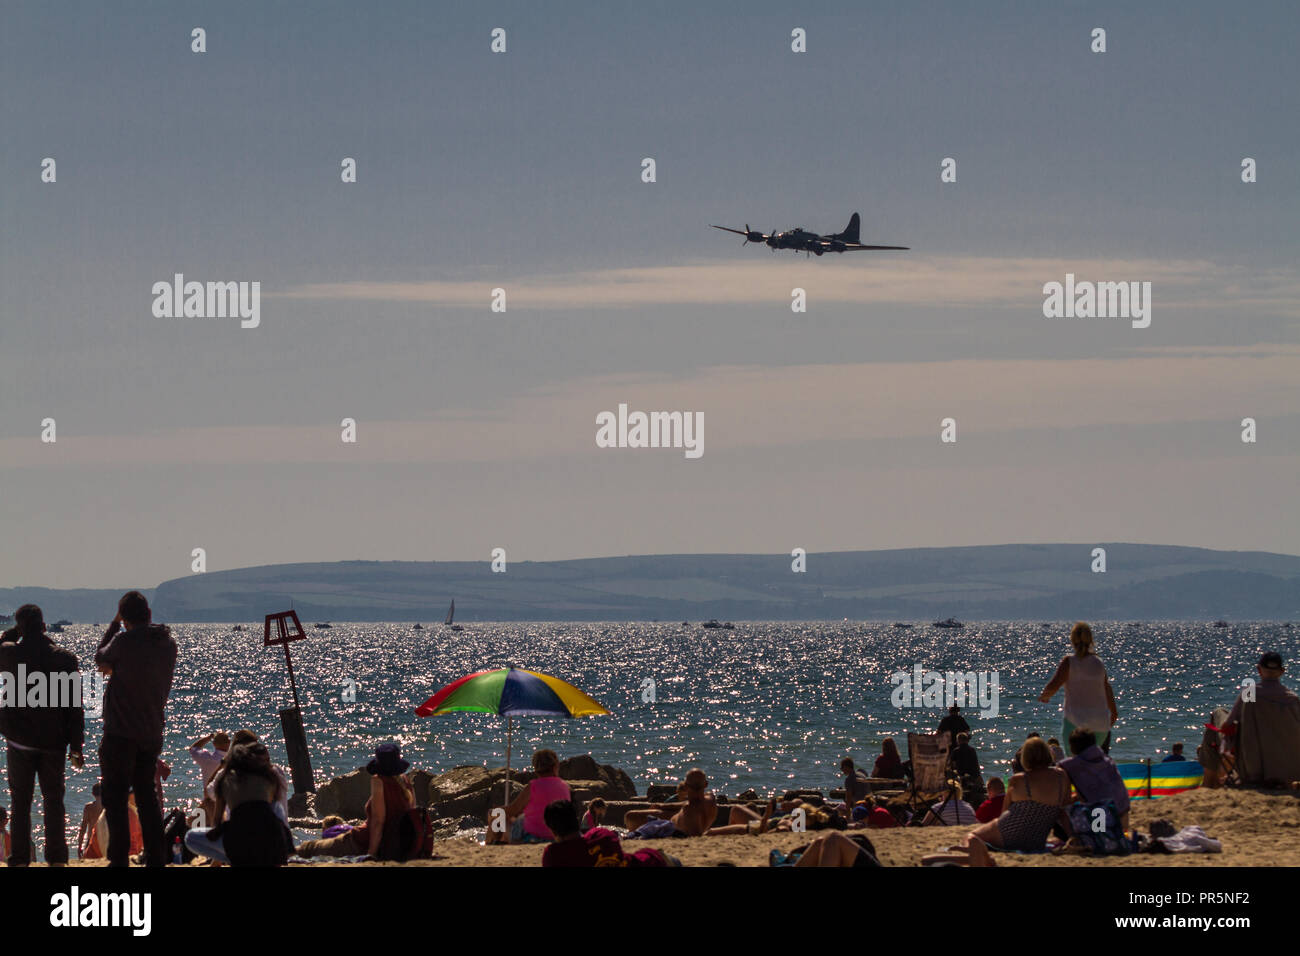 Bournemouth, United Kingdom – Bournemouth Air Festival 2018 spectators on beach Sally-B B17 Flying Fortress aeroplane on September 2 2018 in Bournemou Stock Photo